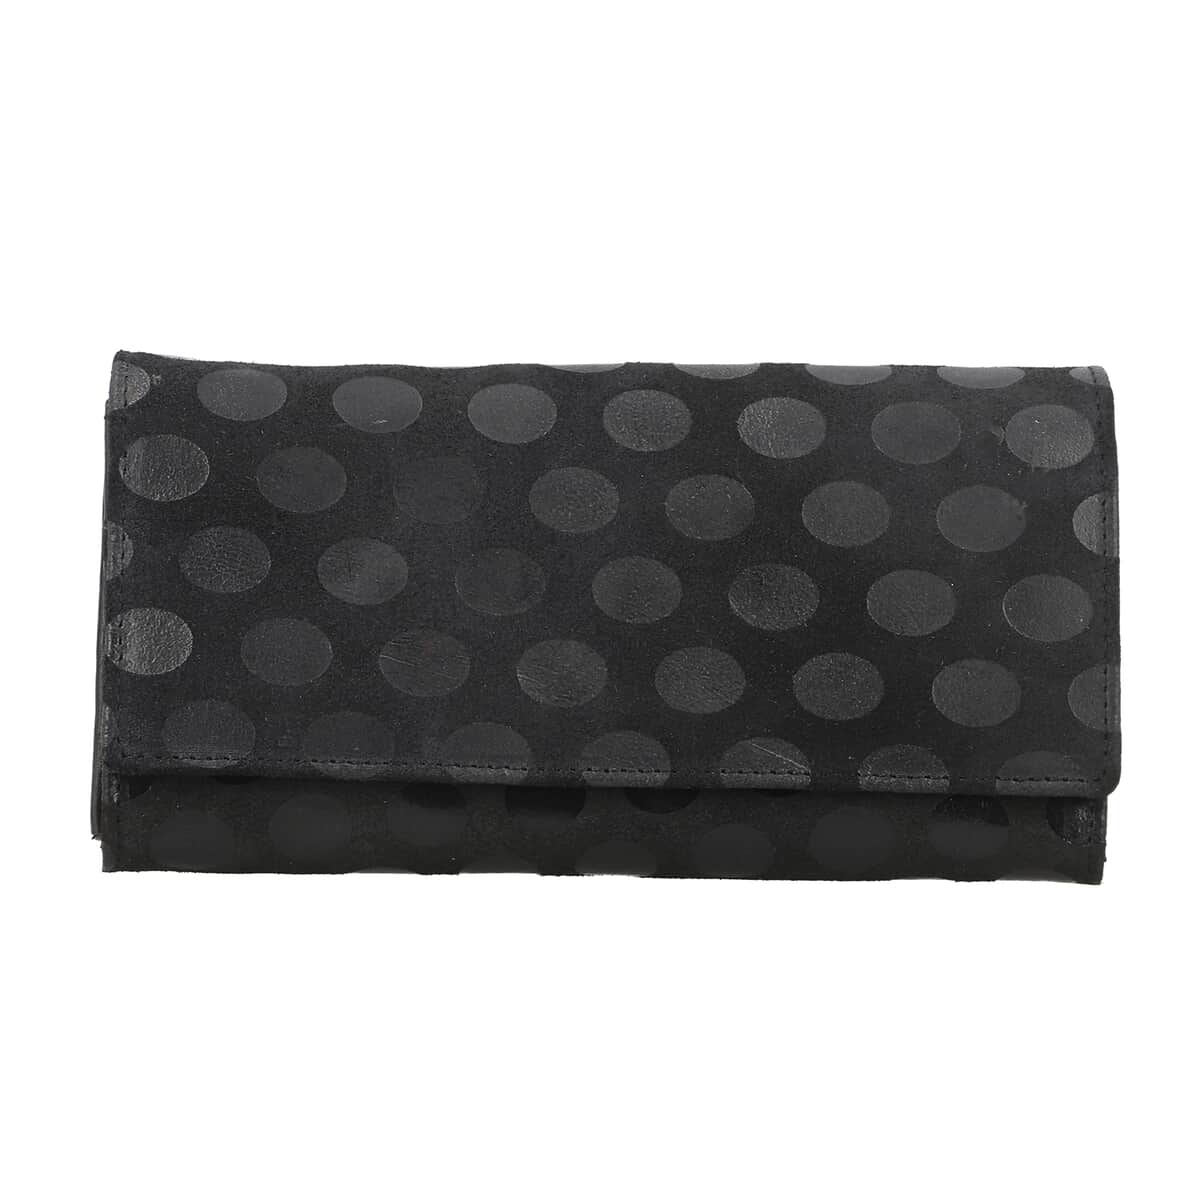 UNION CODE Black Genuine Leather RFID Women's Wallet (7.5"x4.5") image number 0